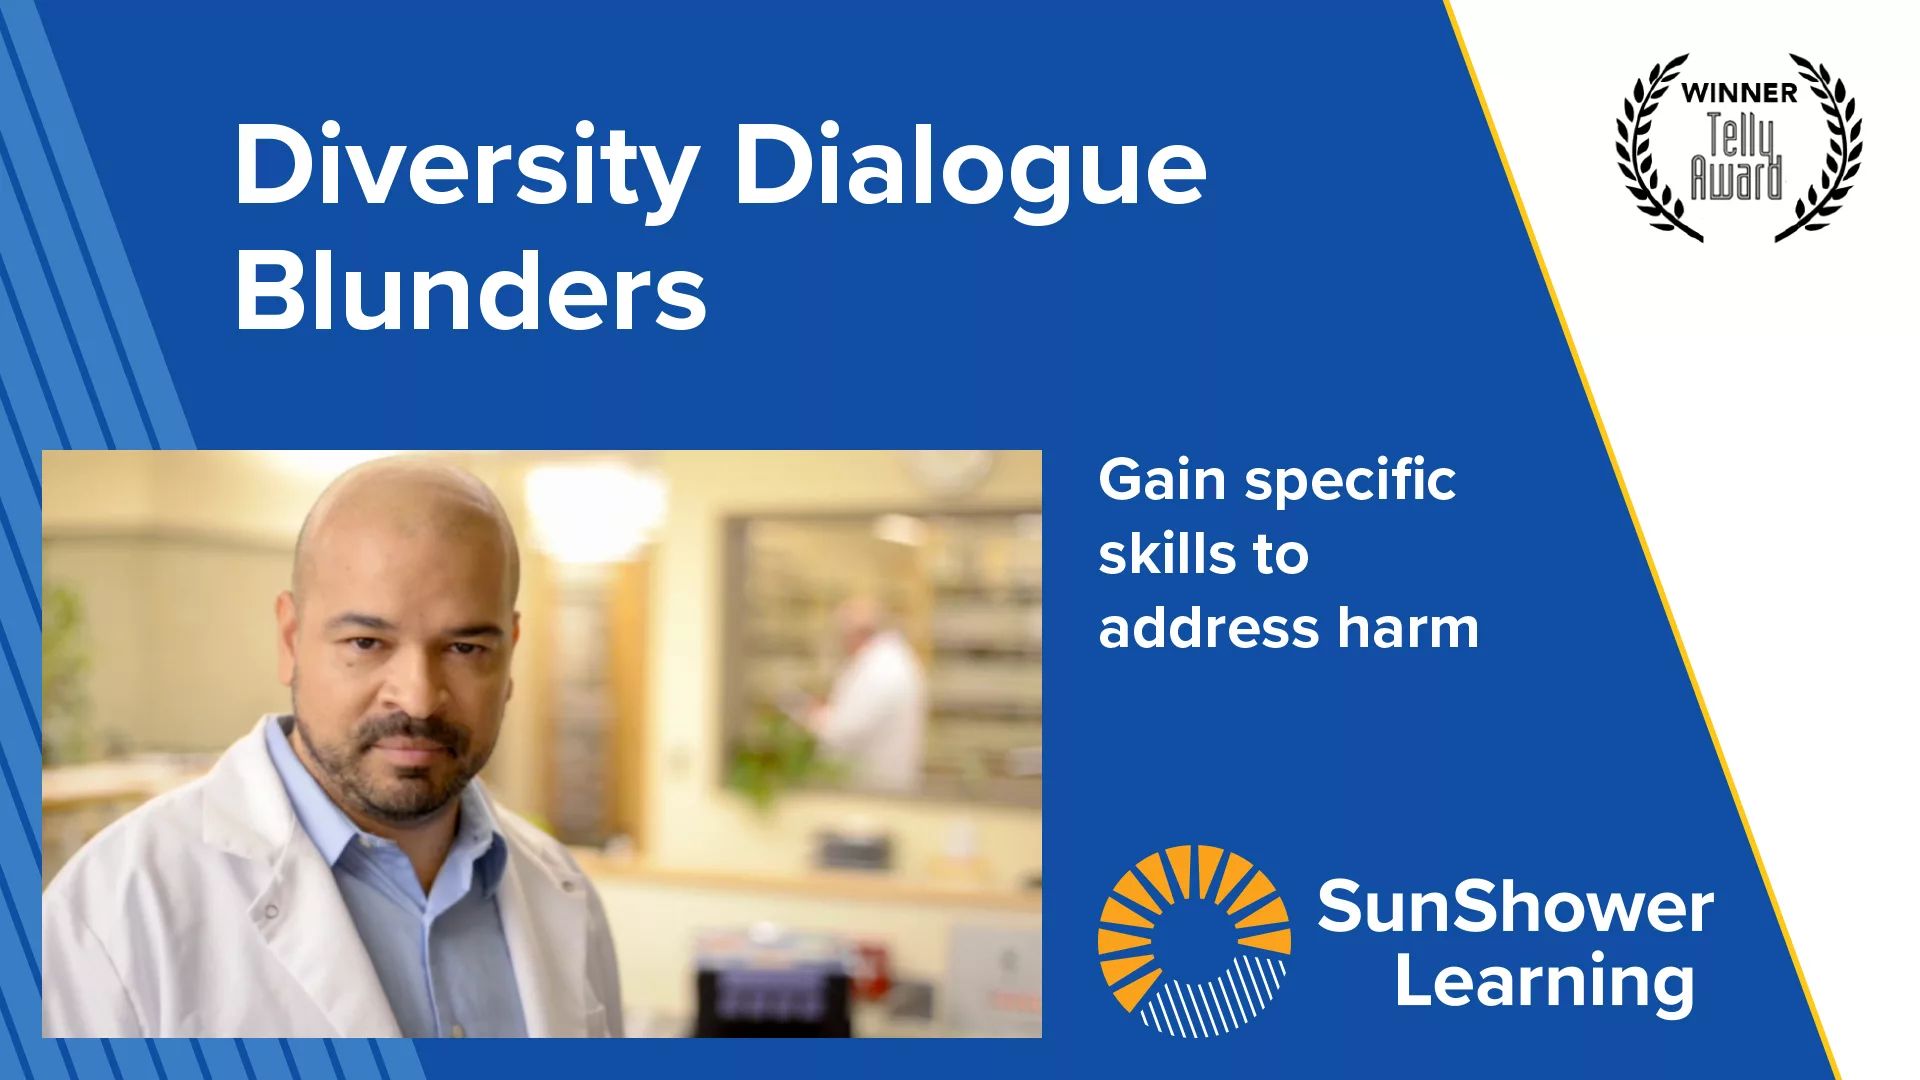 Thumbnail image with title, Diversity Dialogue Blunders and text: Gain specific skills to address harm. Telly award seal.